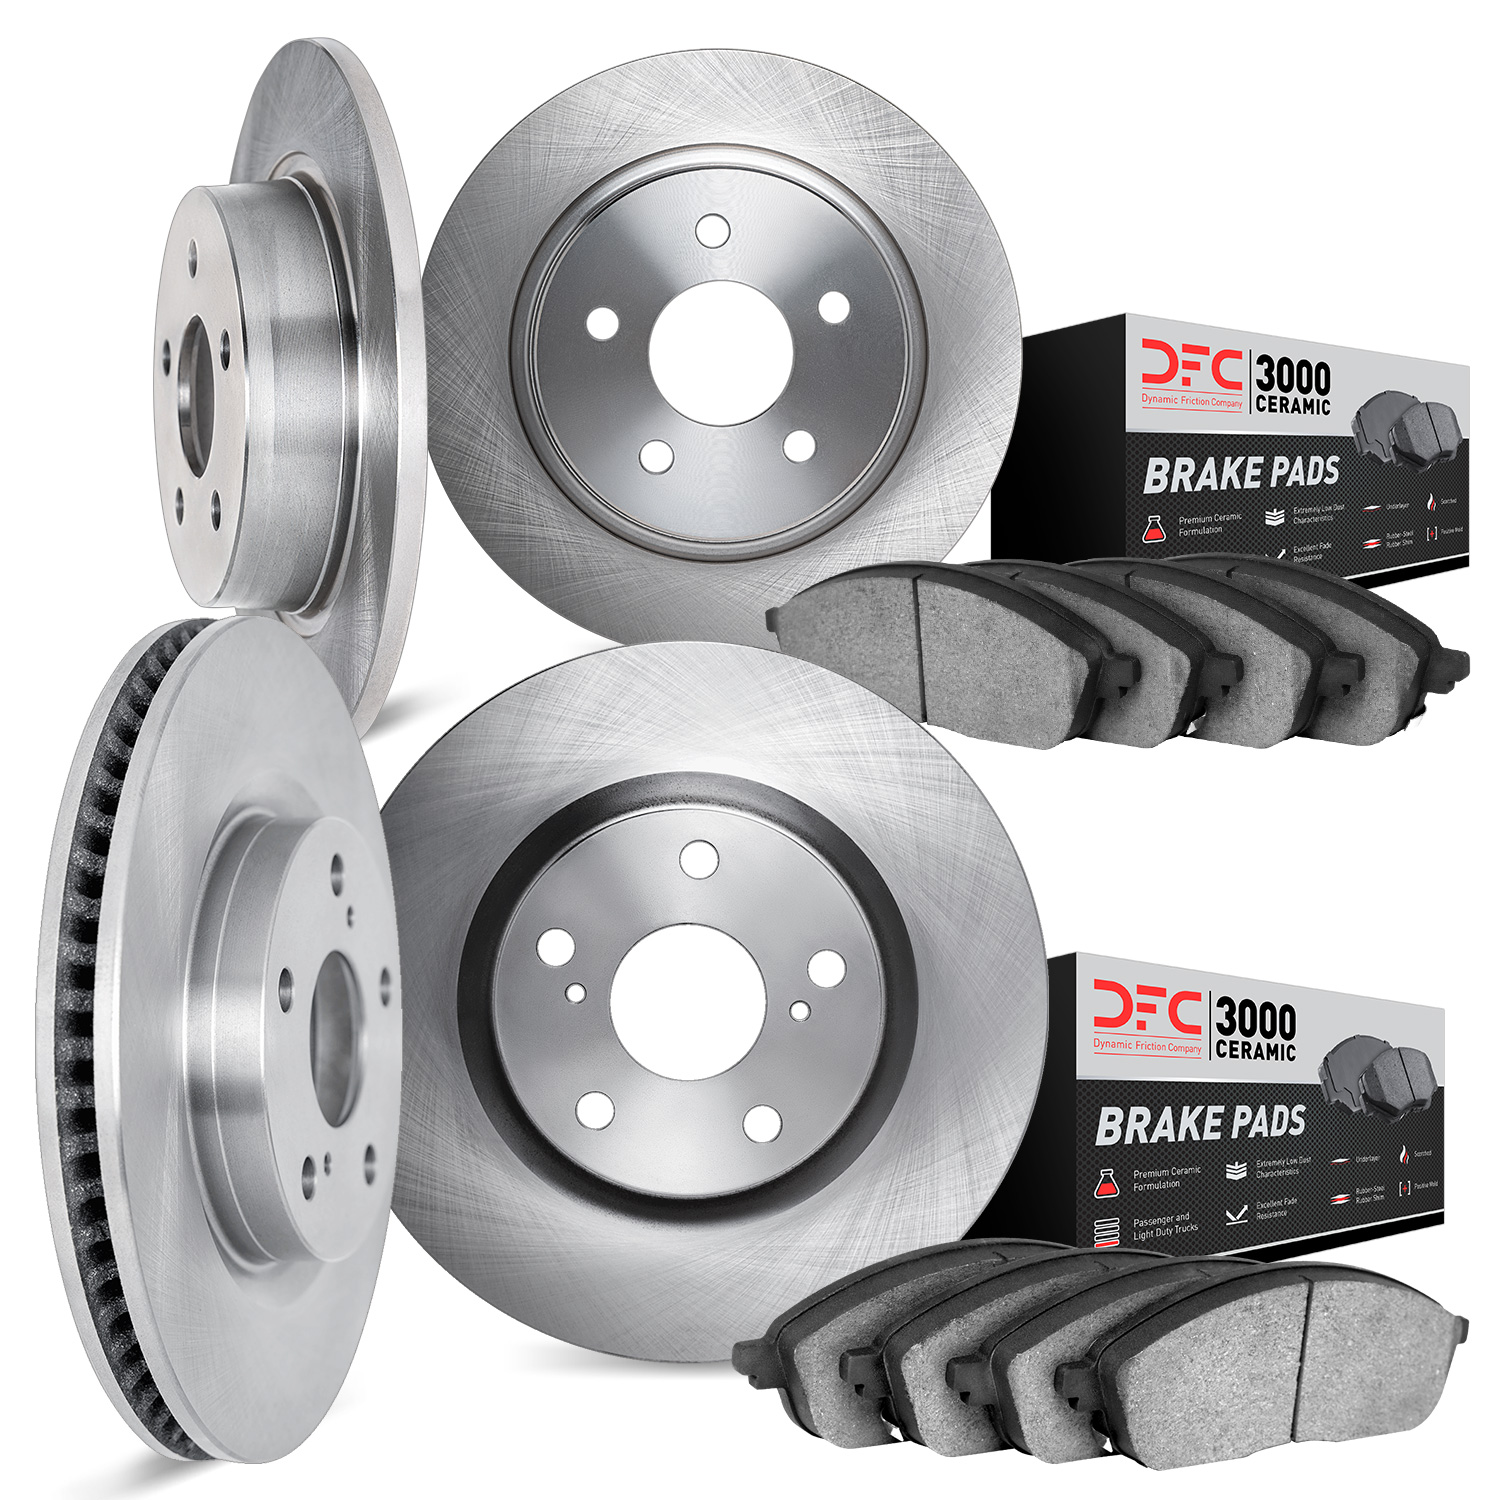 6304-59075 Brake Rotors with 3000-Series Ceramic Brake Pads Kit, Fits Select Acura/Honda, Position: Front and Rear